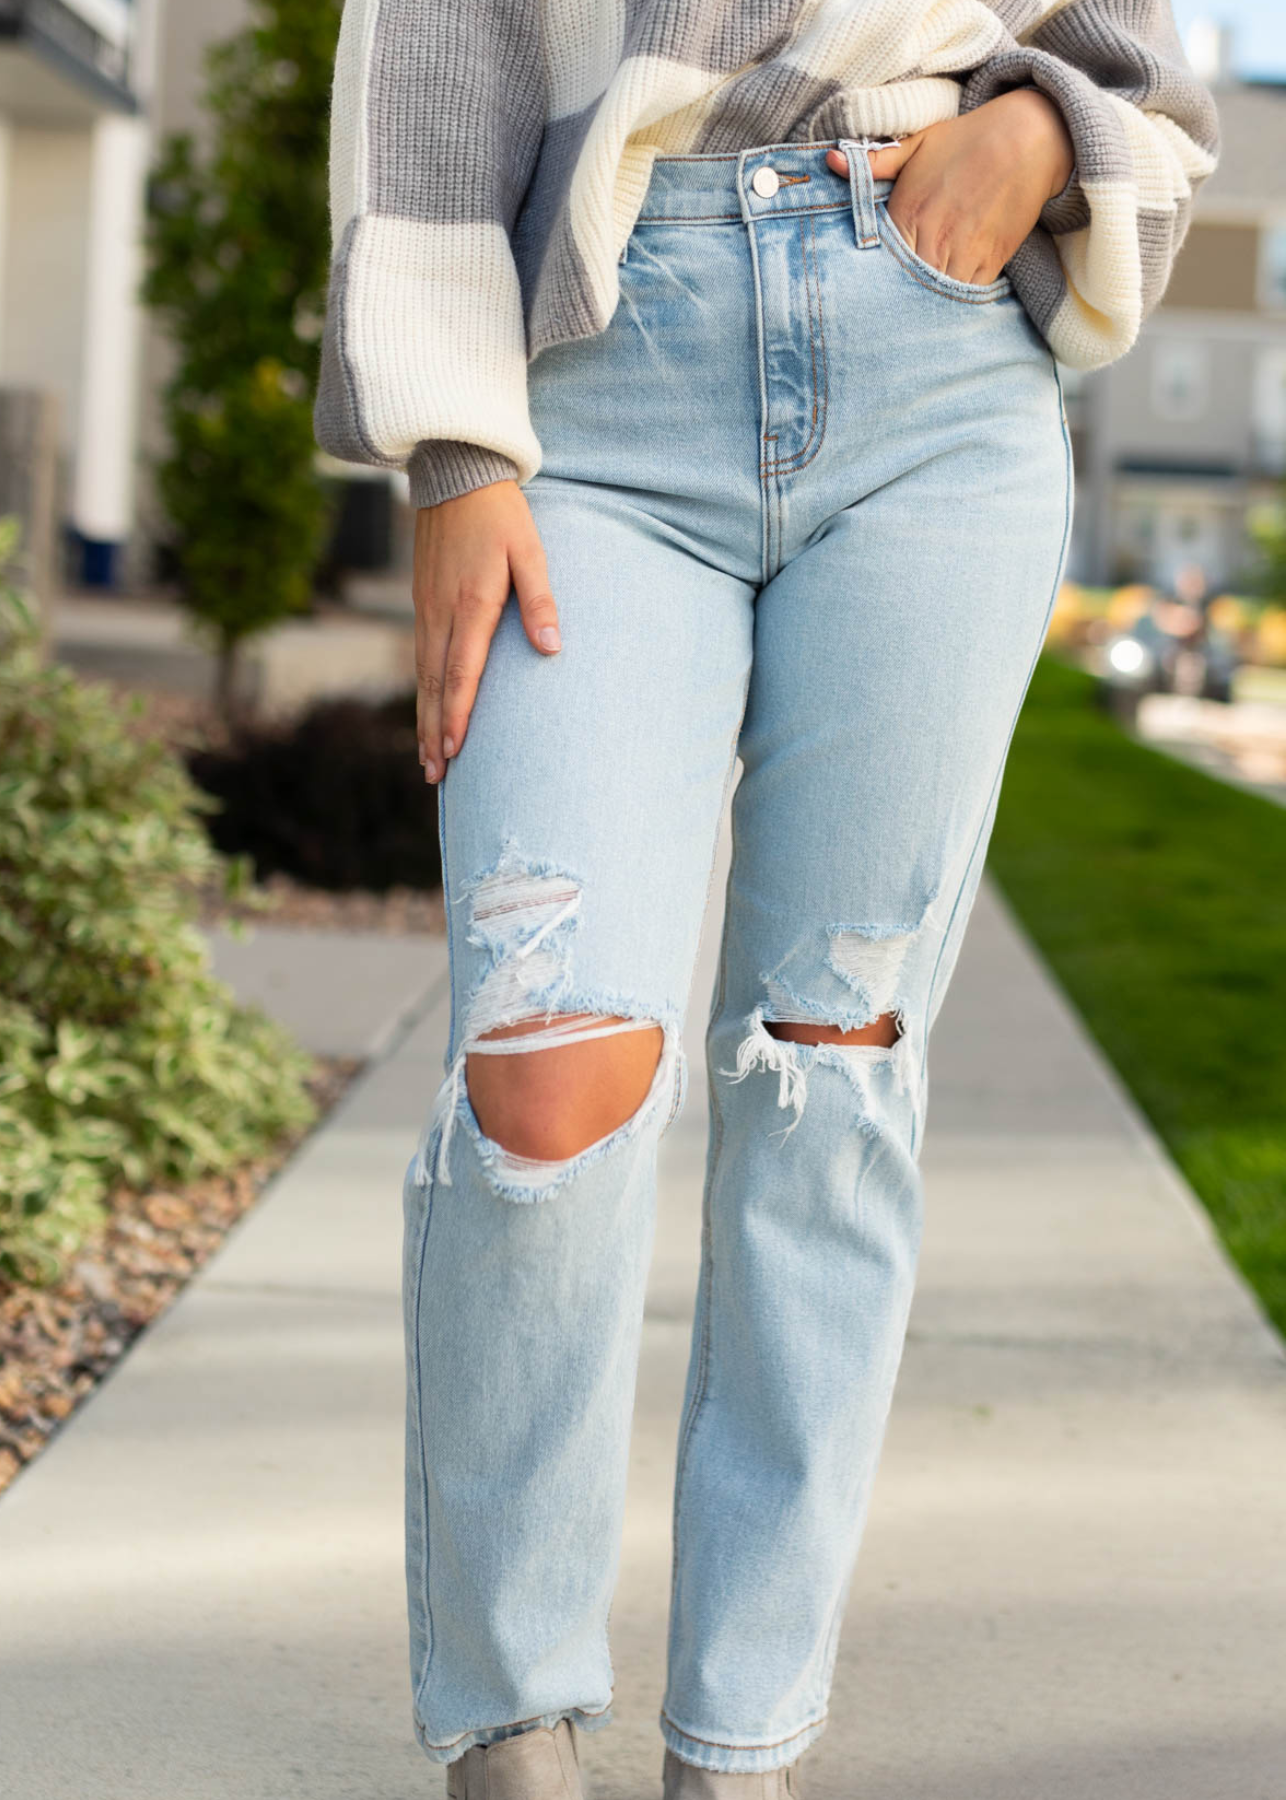 Distressed light jeans with distressed knees